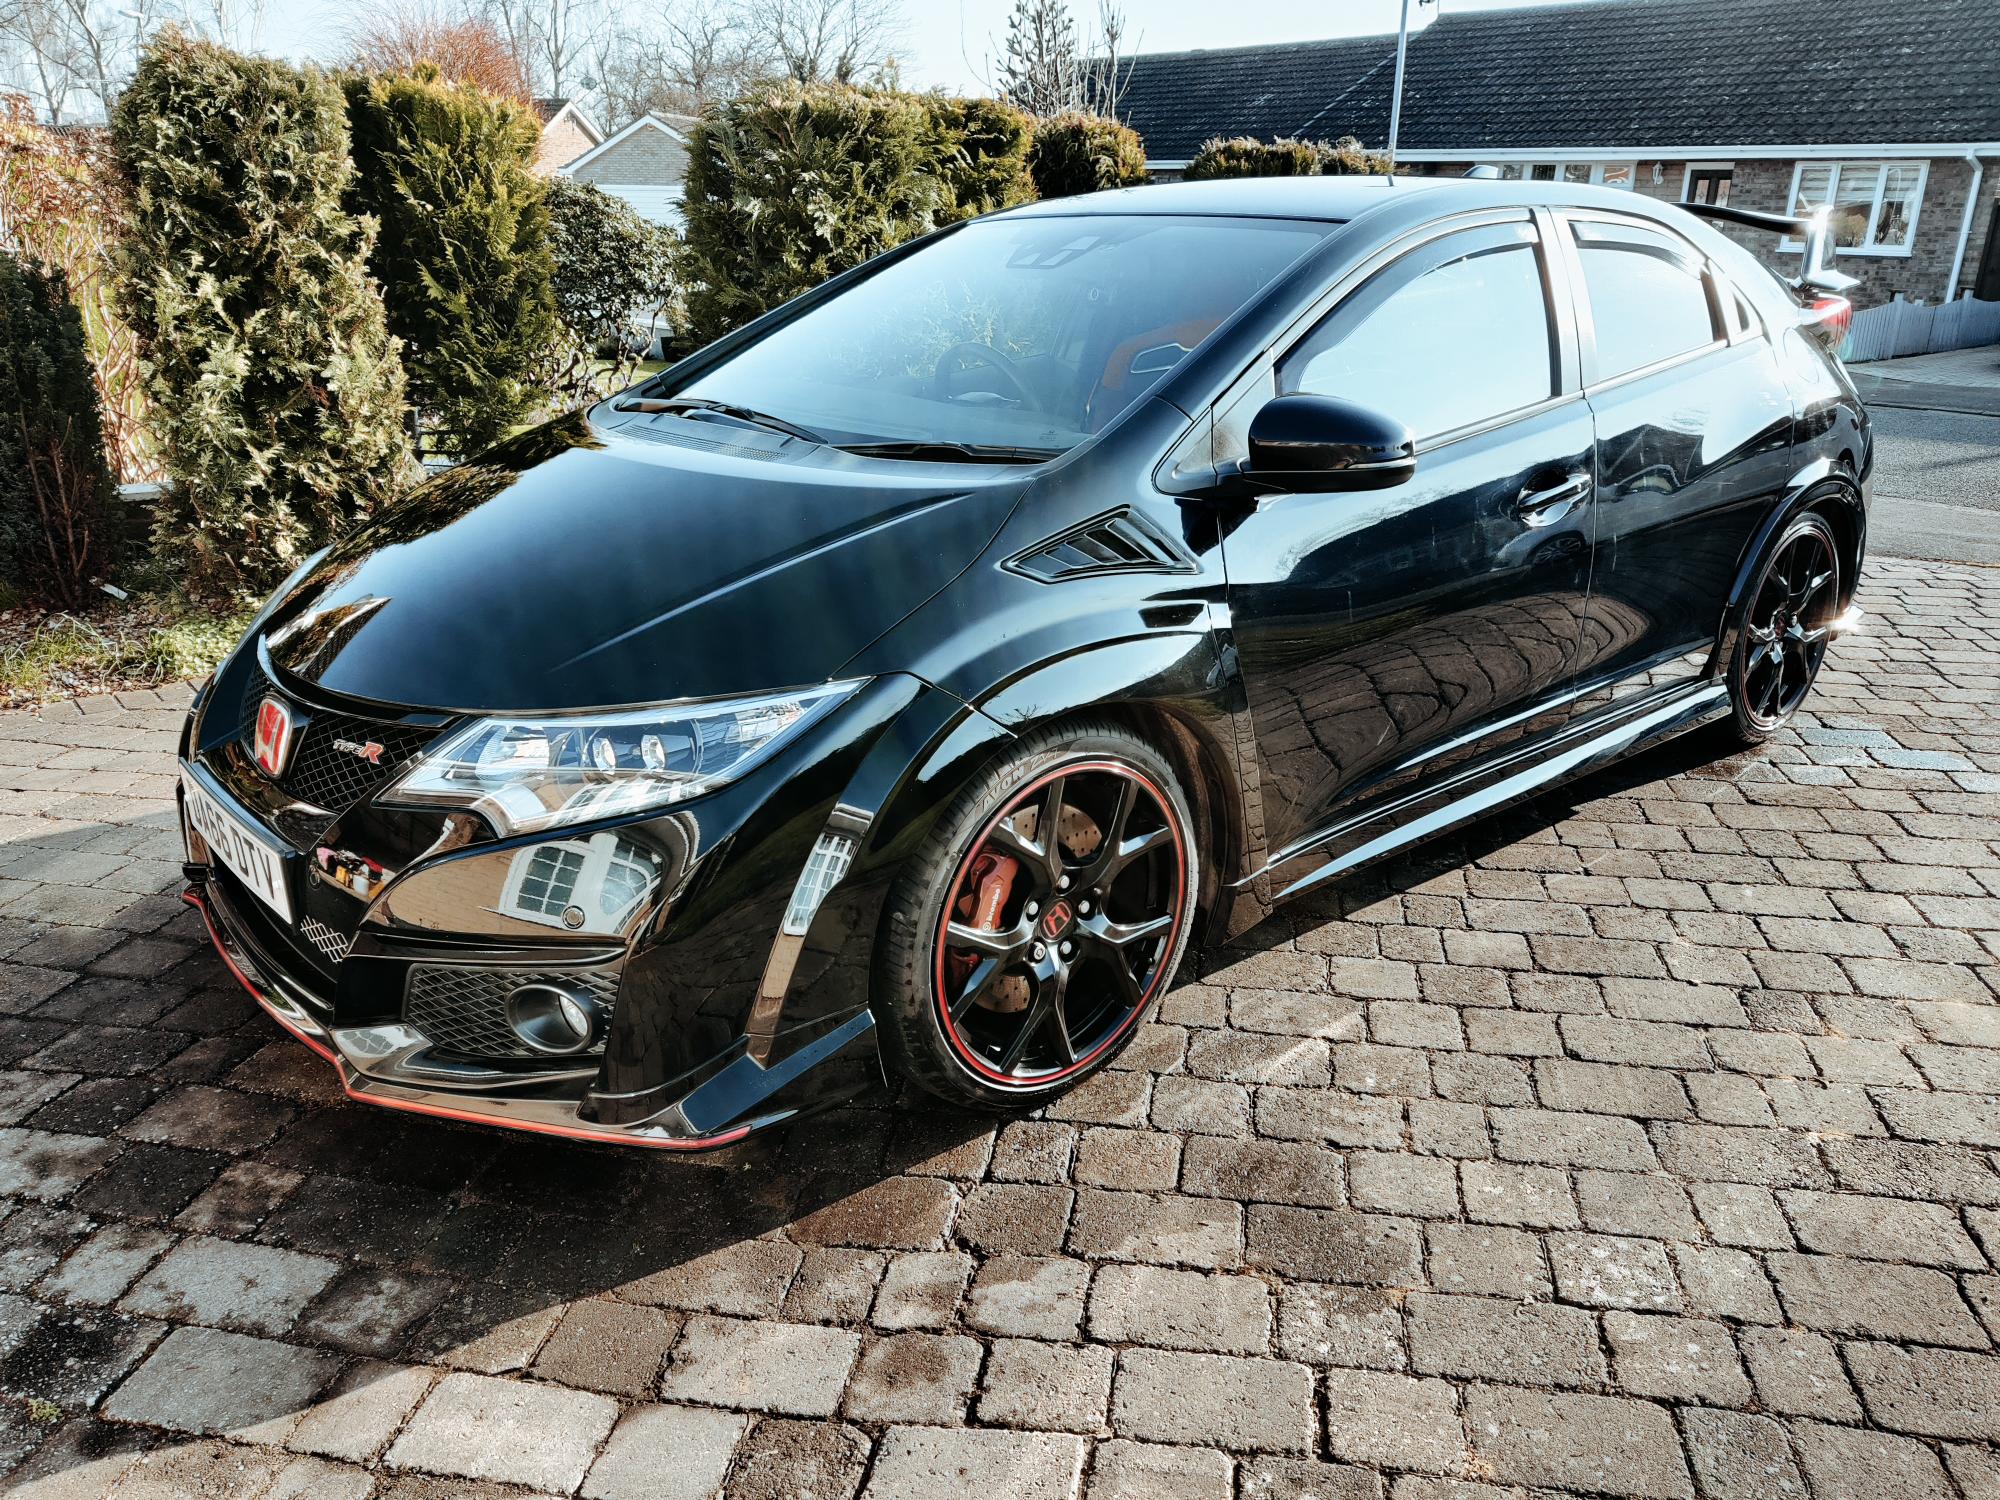 Rusty thought the Honda Civic Type R was 'probably one of the best enthusiast cars ever made'